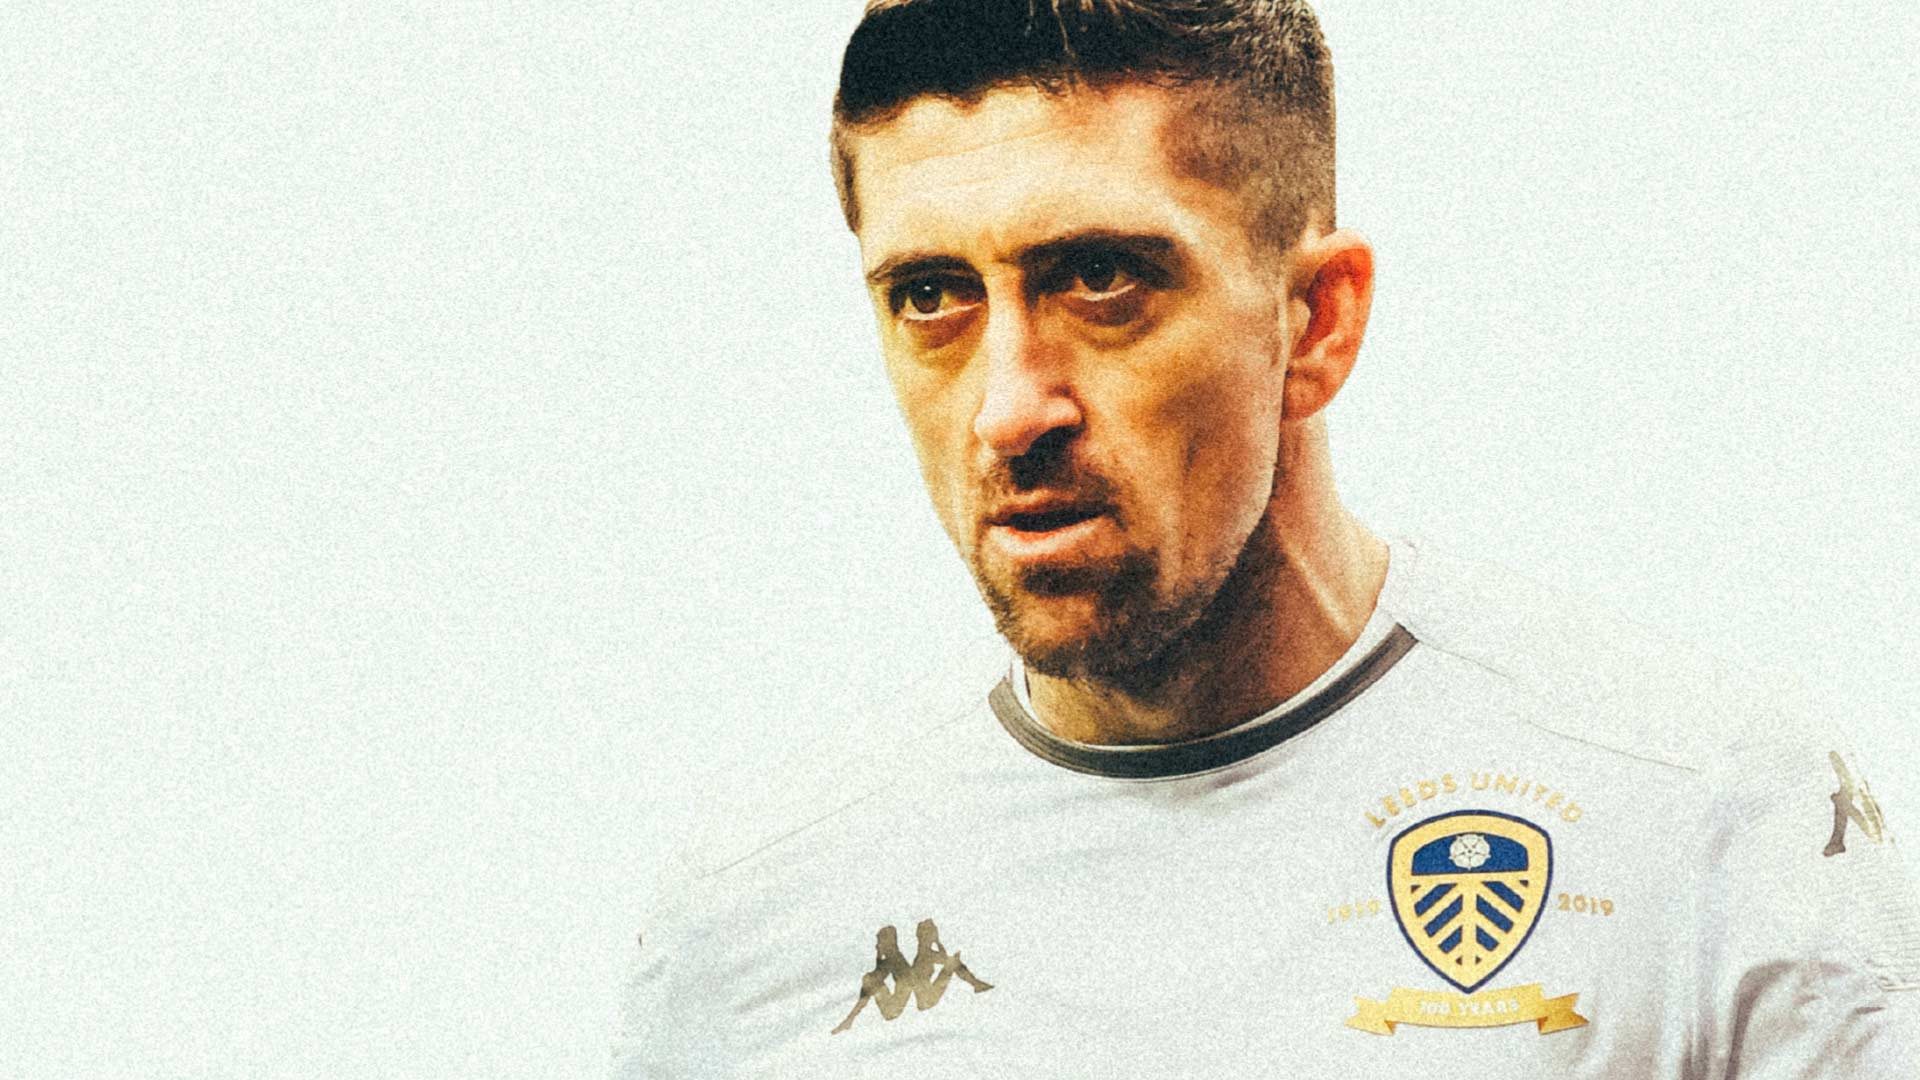 Pablo Hernandez staring intently while playing for Leeds. He's either about to do something brilliant or contemplating his past